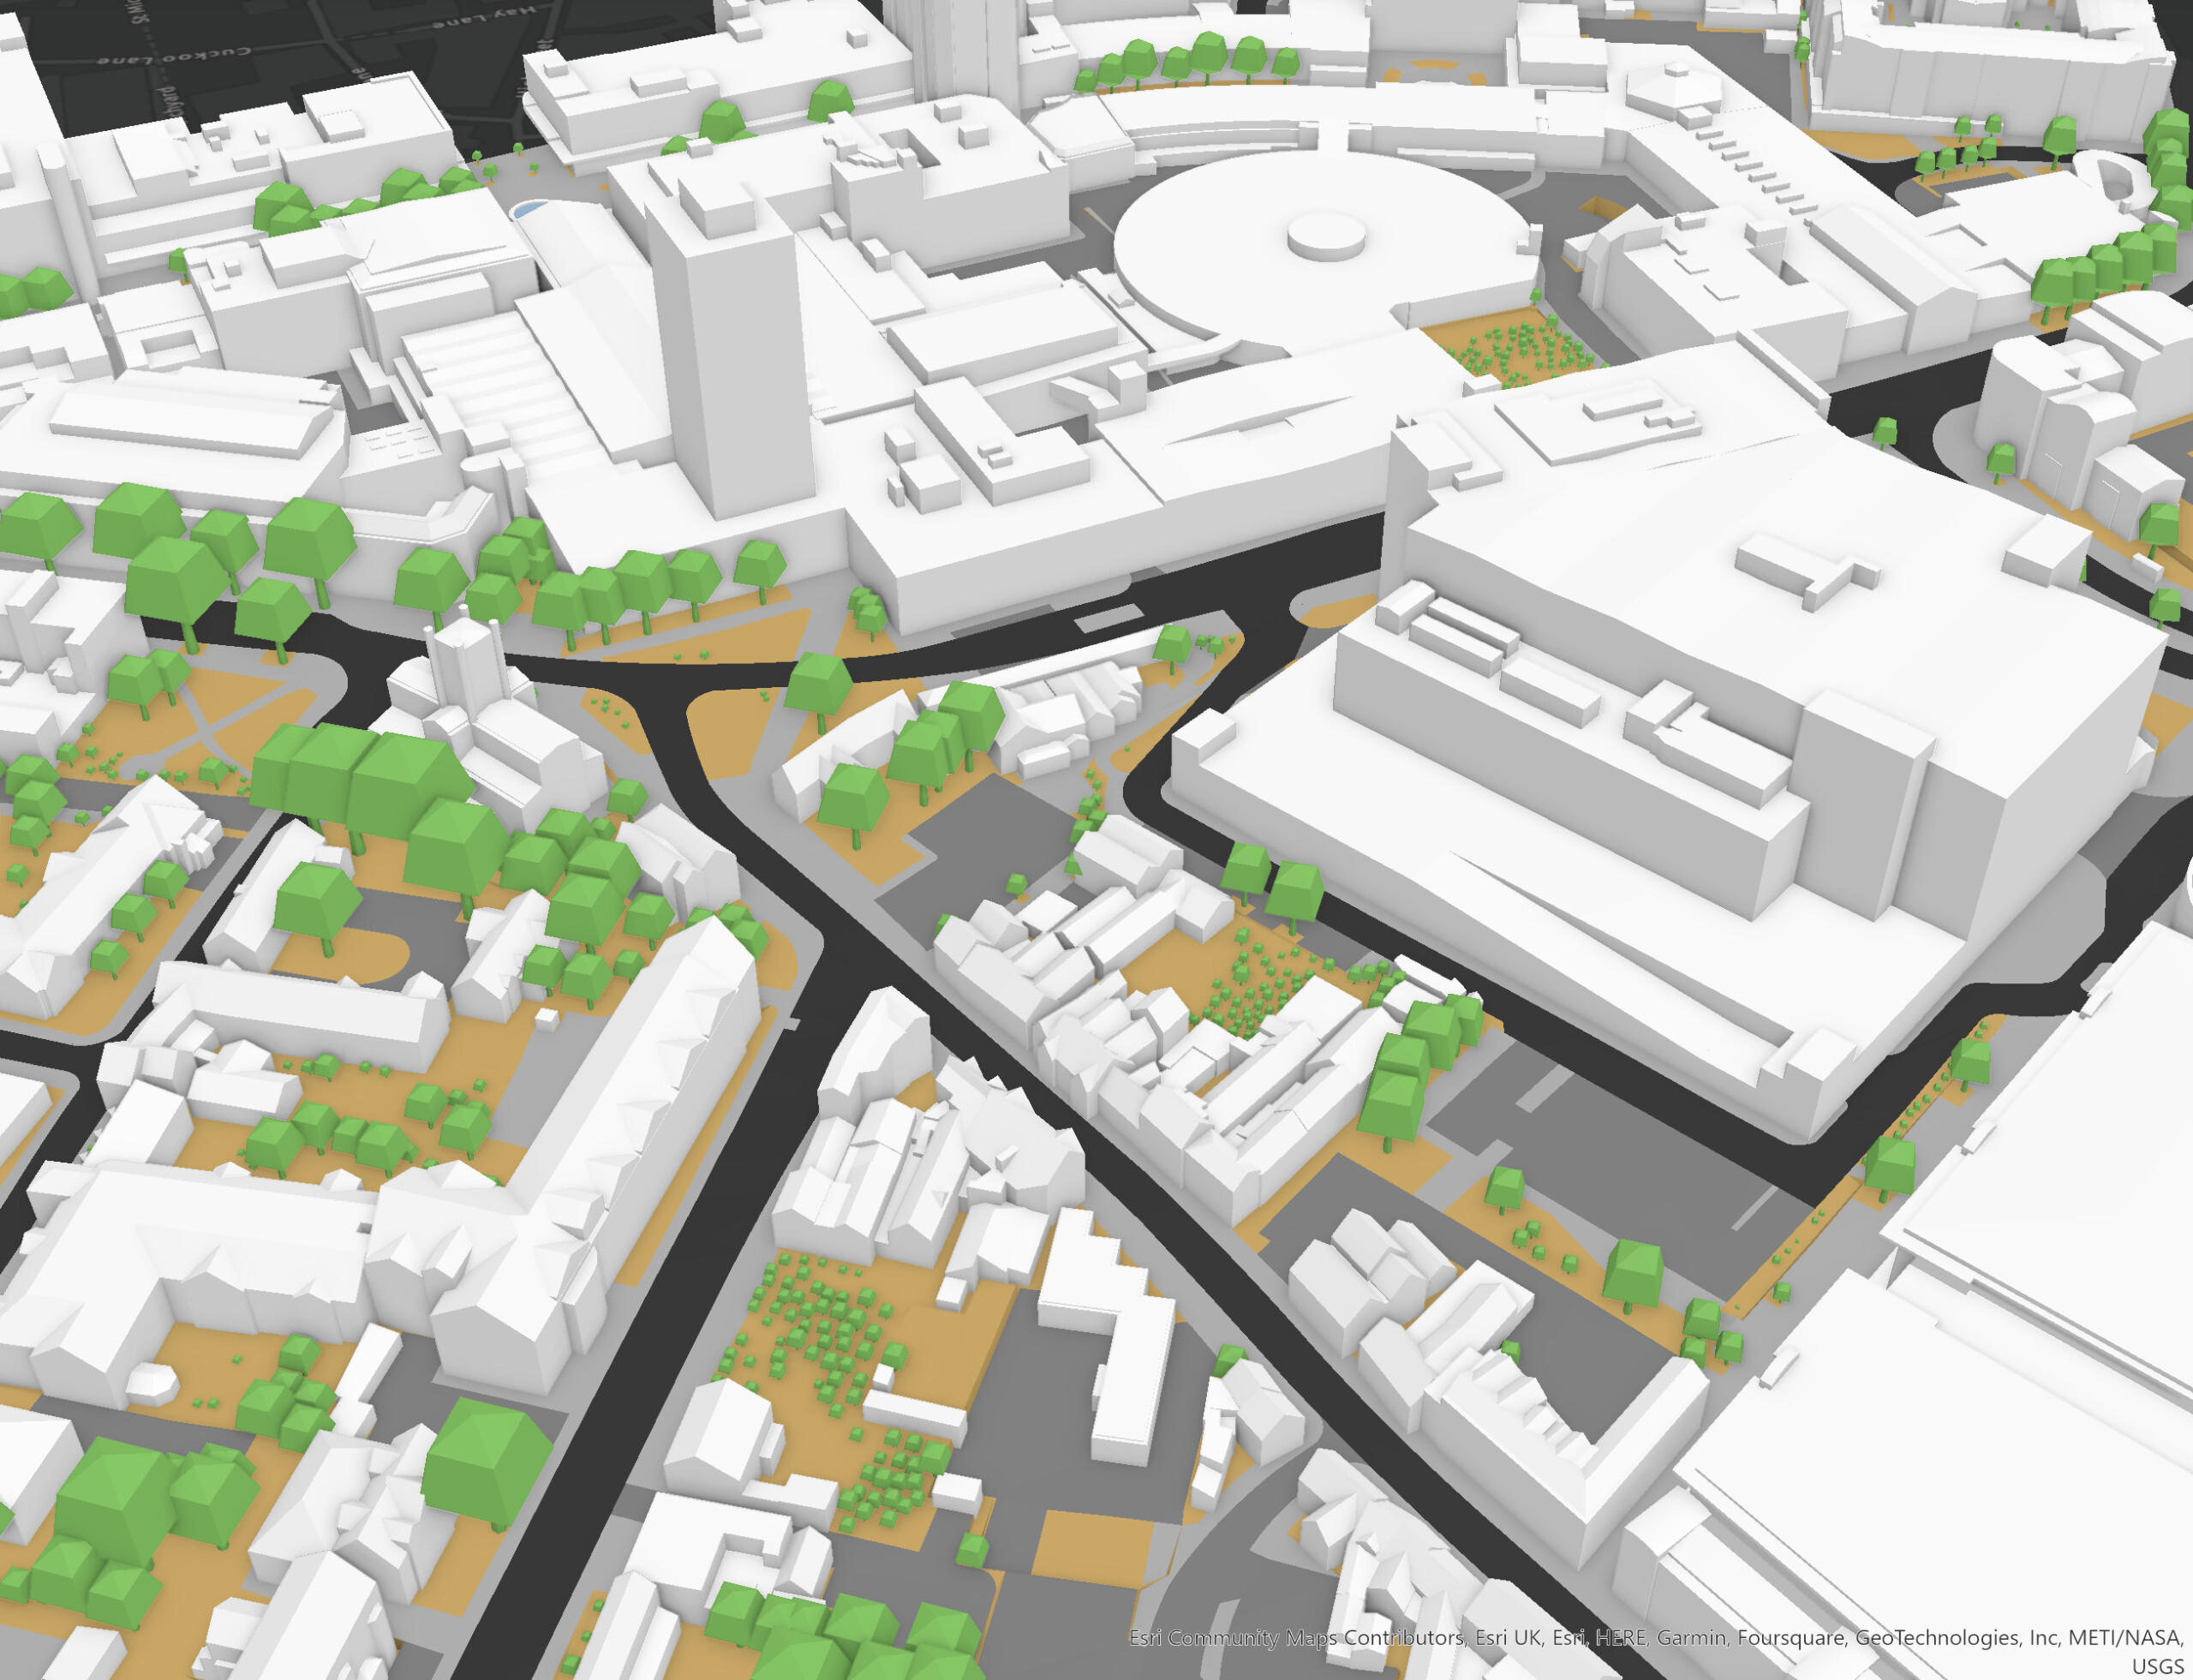 3D city model showing buildings with level of detail 2 (LOD2)